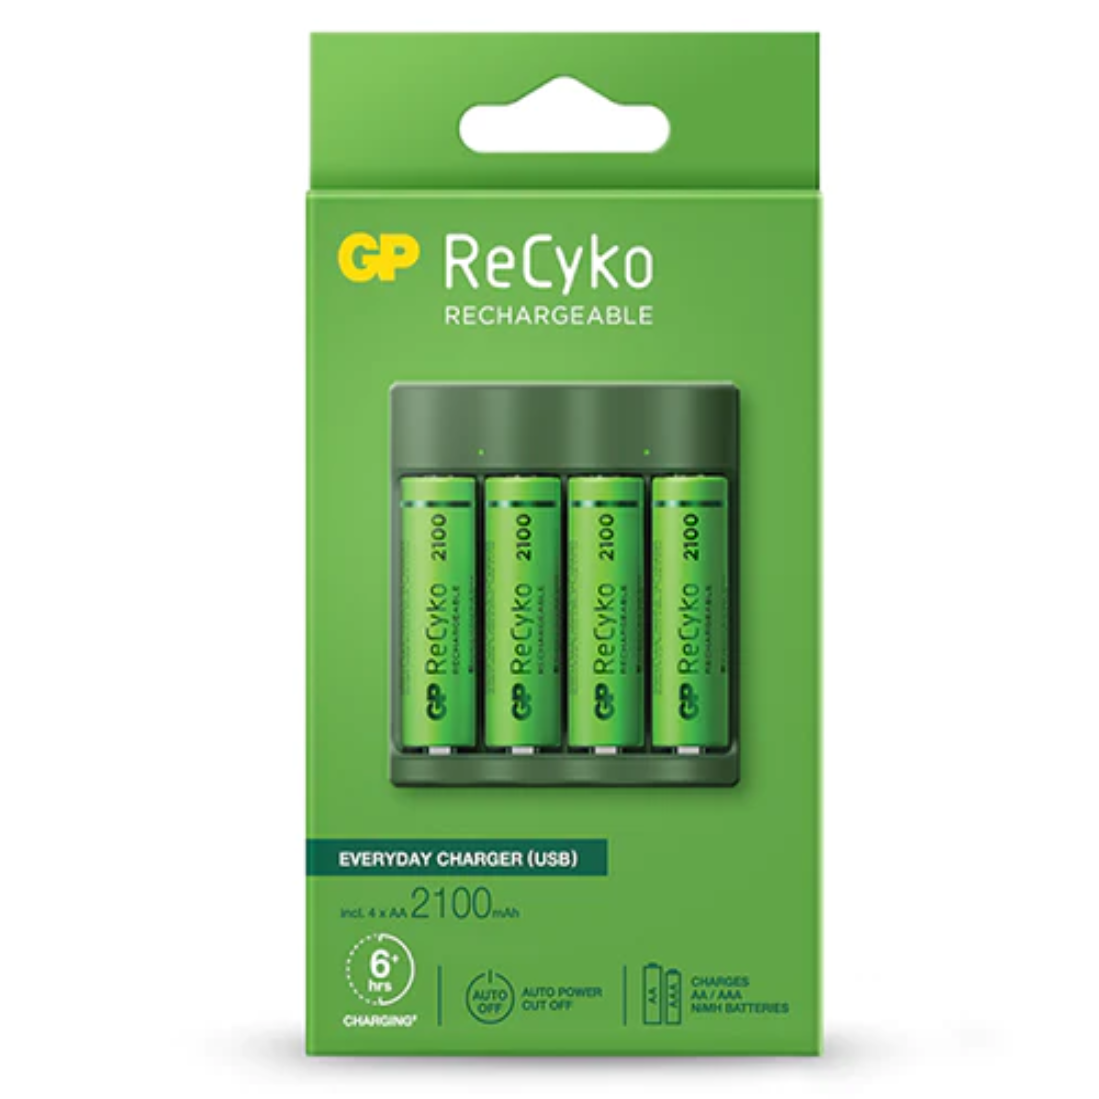 GP ReCyko USB Charger With 4 X 2100mAh AA Rechargeable Battery